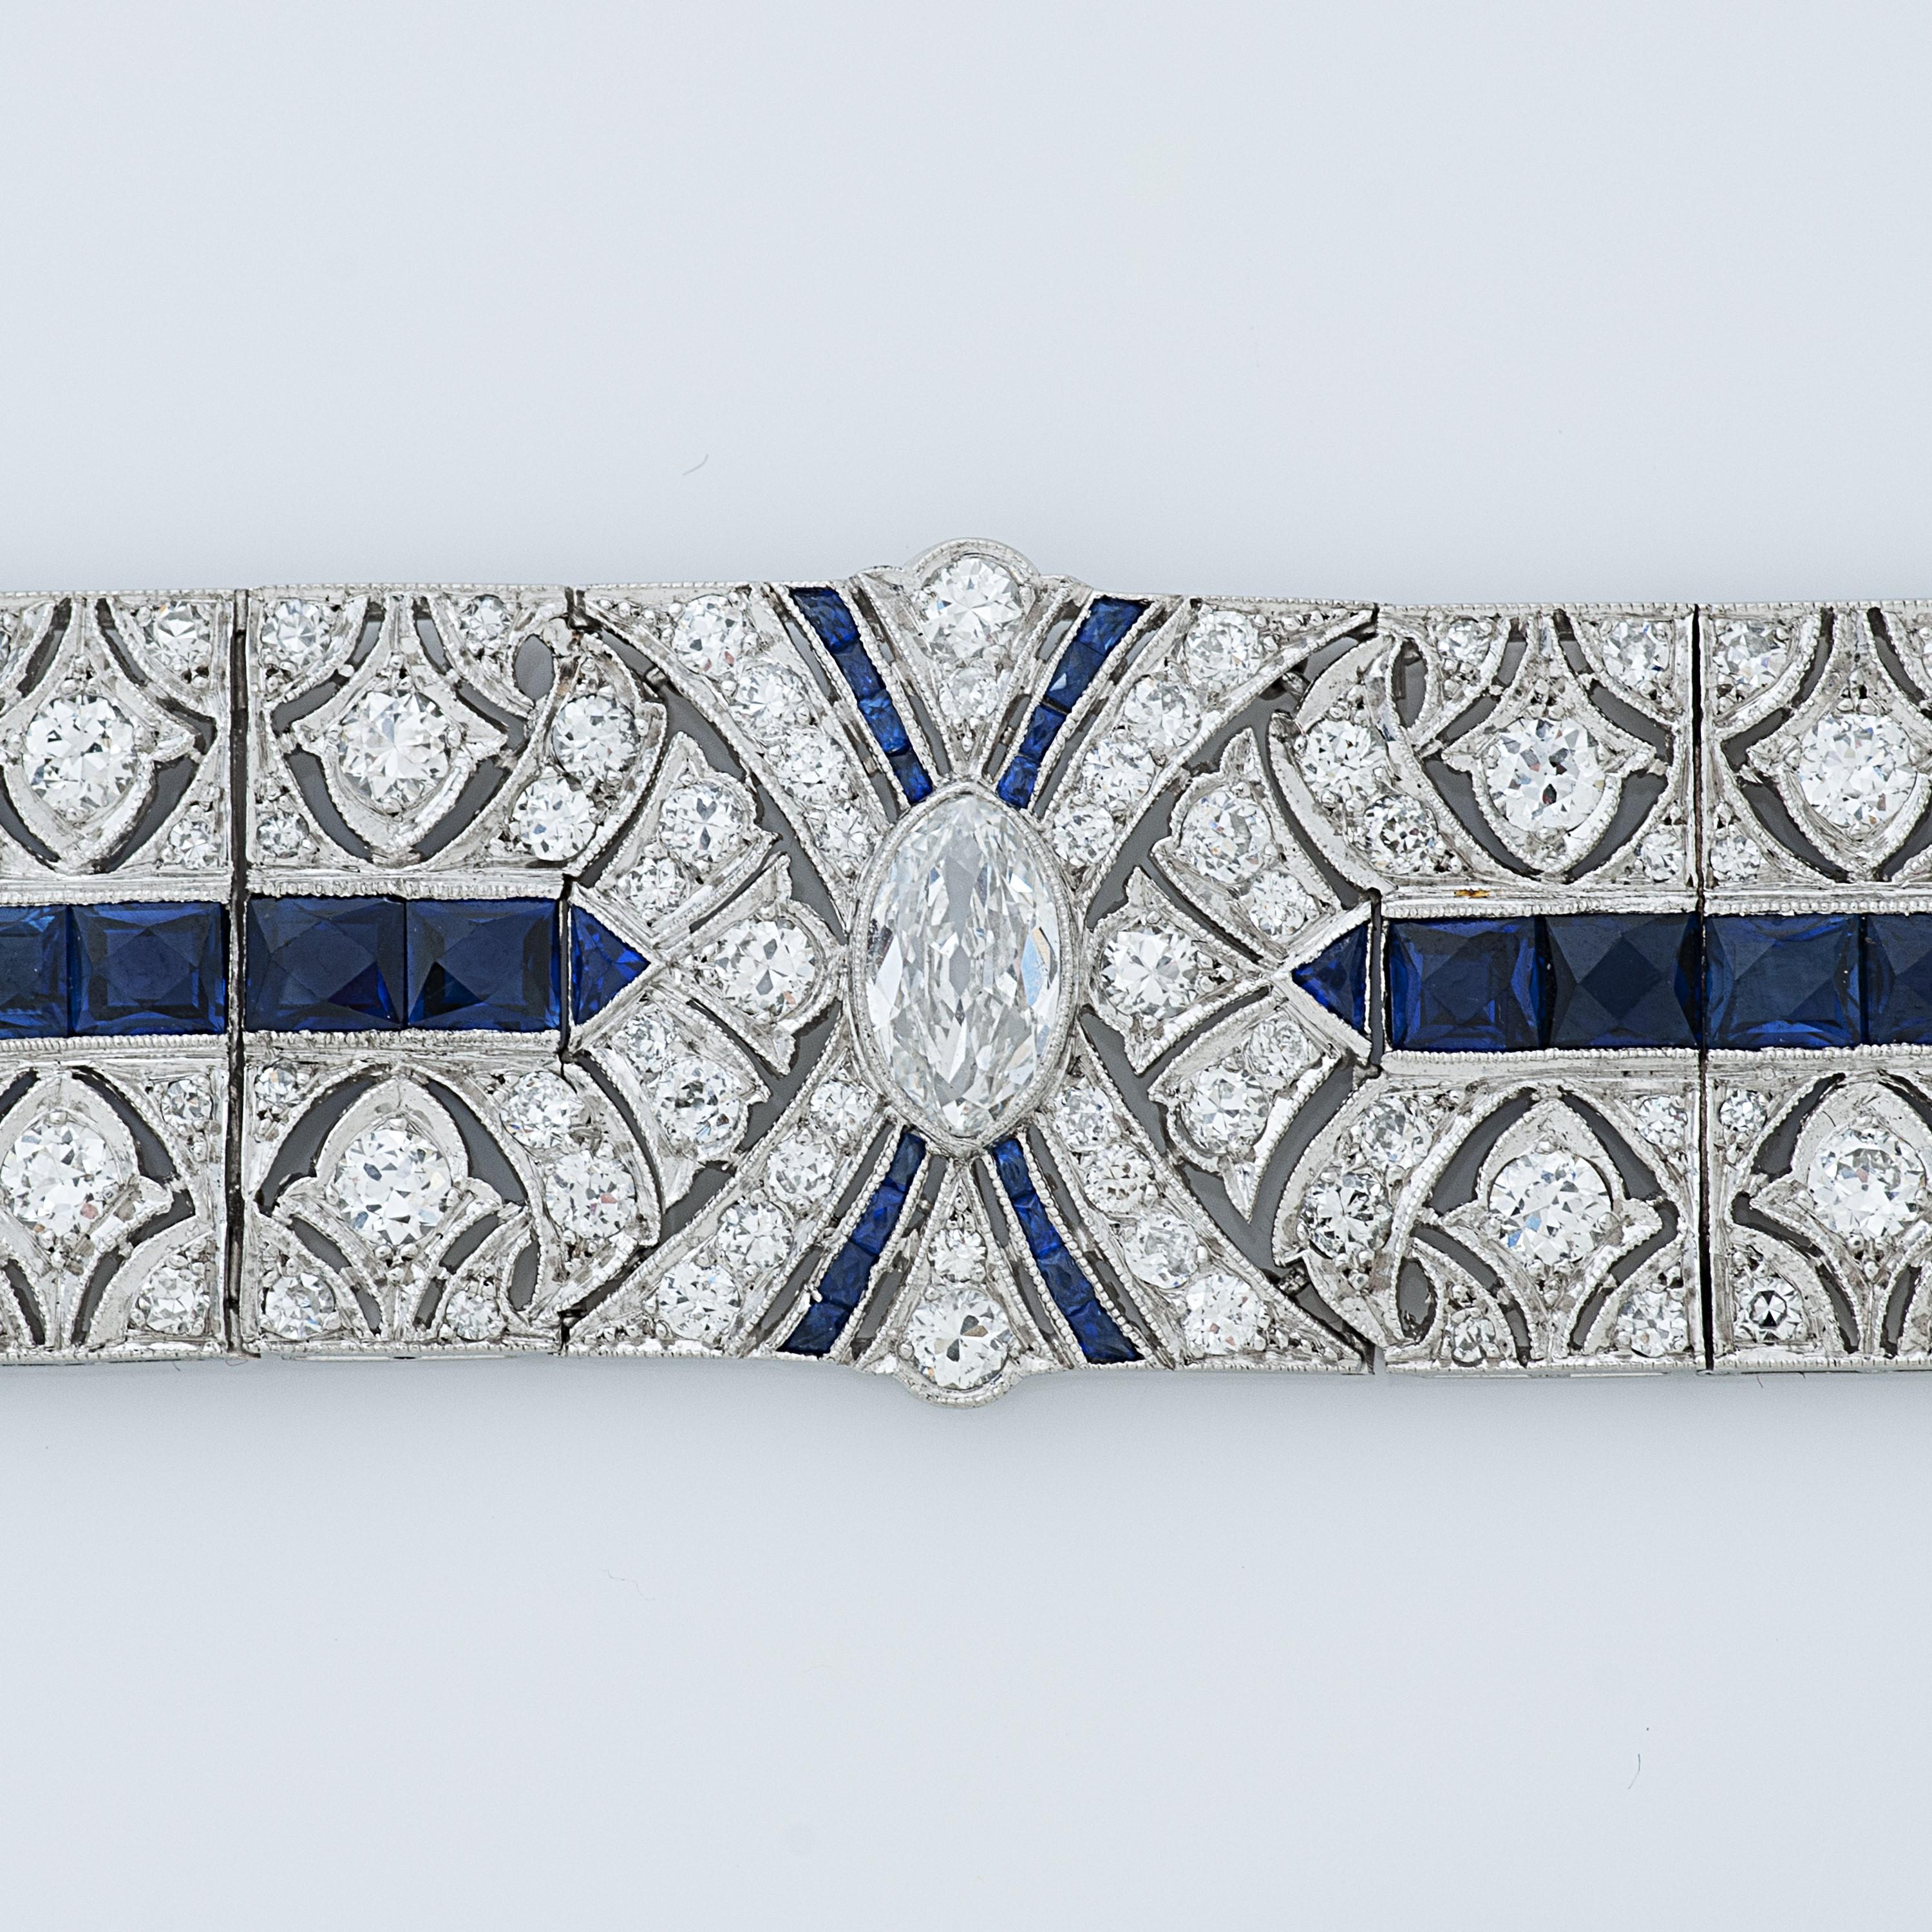 Art Deco diamond and sapphire platinum bracelet.

The center stone of this bracelet is a 0.65 carat marquise shaped diamond with G color and SI clarity, it is surrounded by 40 old mine cut and old European cut diamonds totaling approximately 3.80